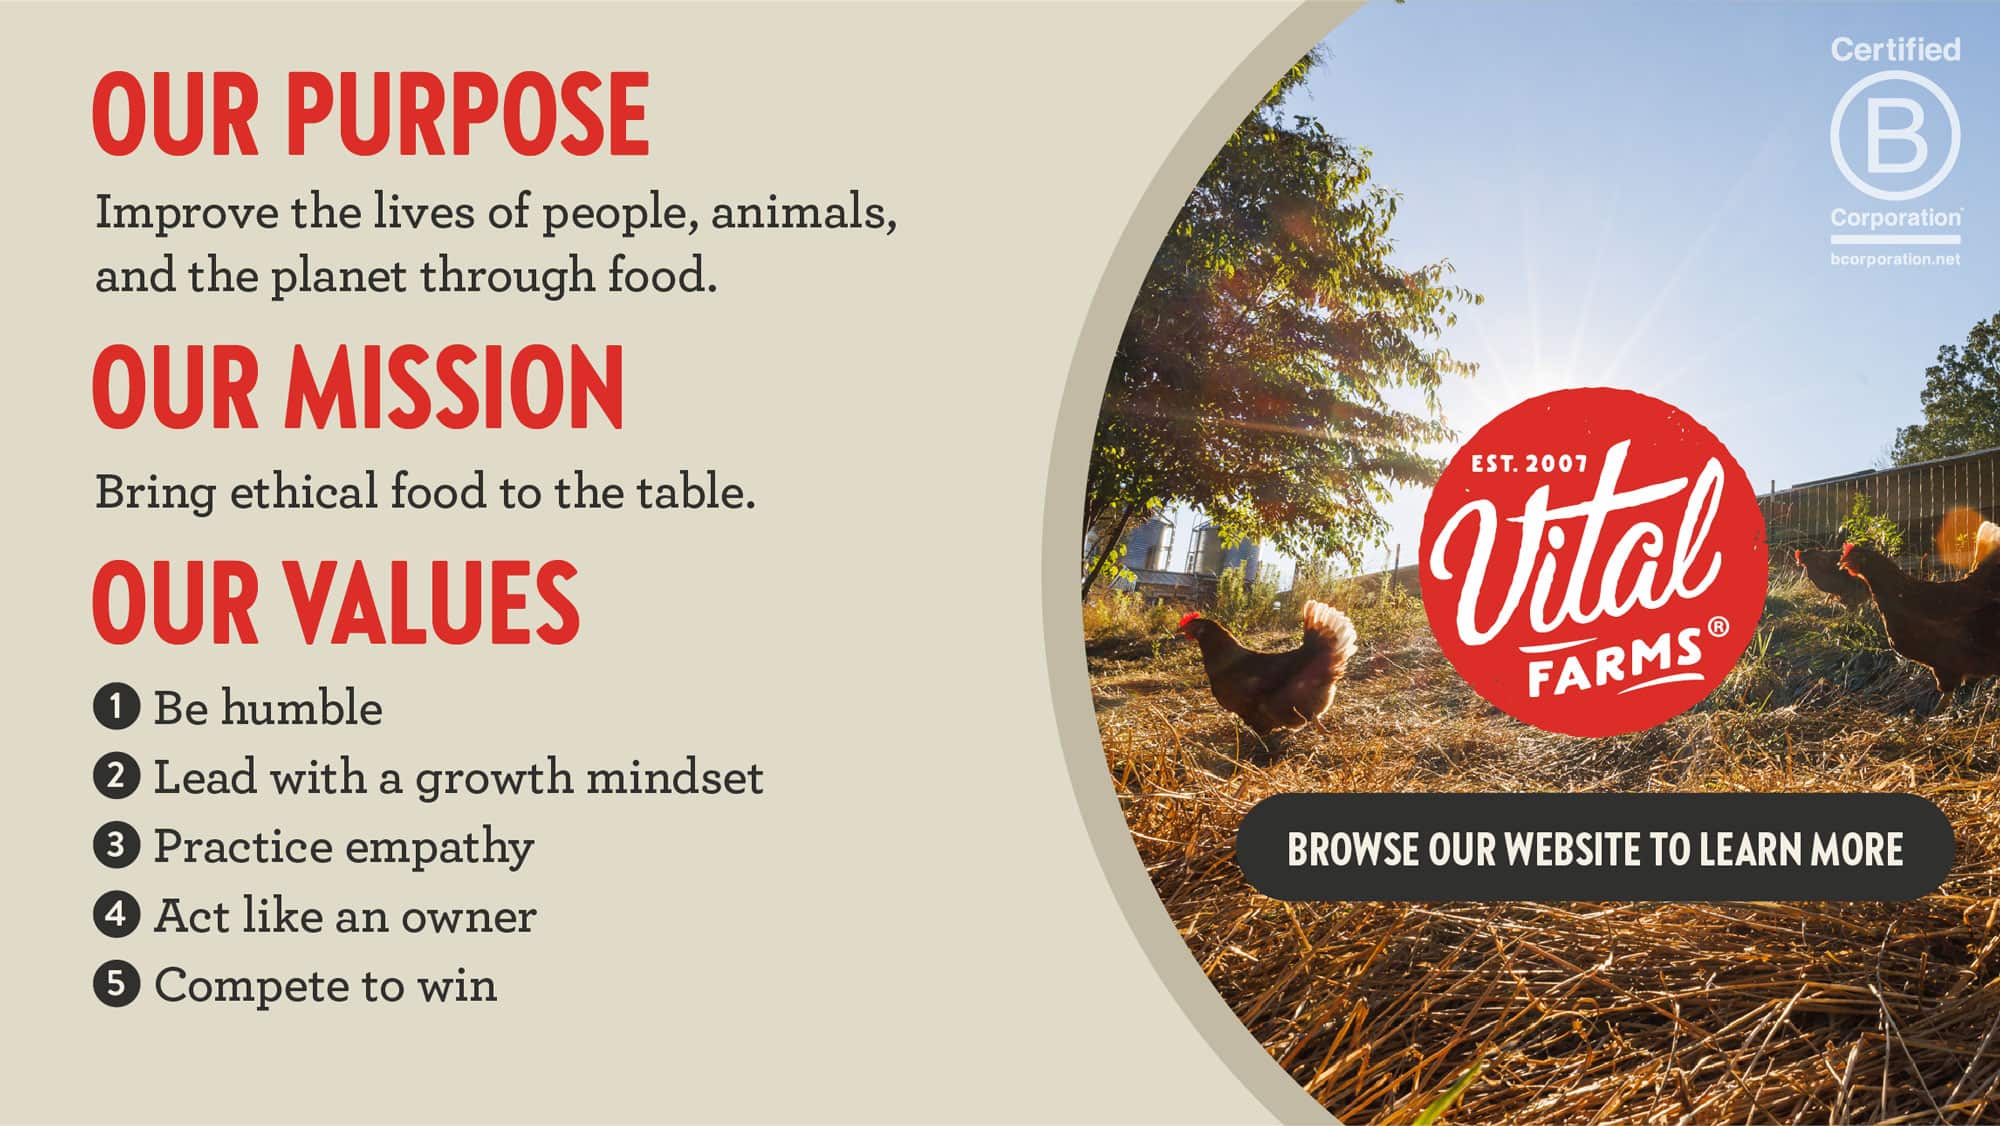 Our Purpose Improve the lives of people, animals, and the planet through food. Our Mission Bring ethical food to the table. Our Values Be humble Lead with a growth mindset Practice empathy Act like an owner Compete to win Certified B Corportation Browse our website to learn more